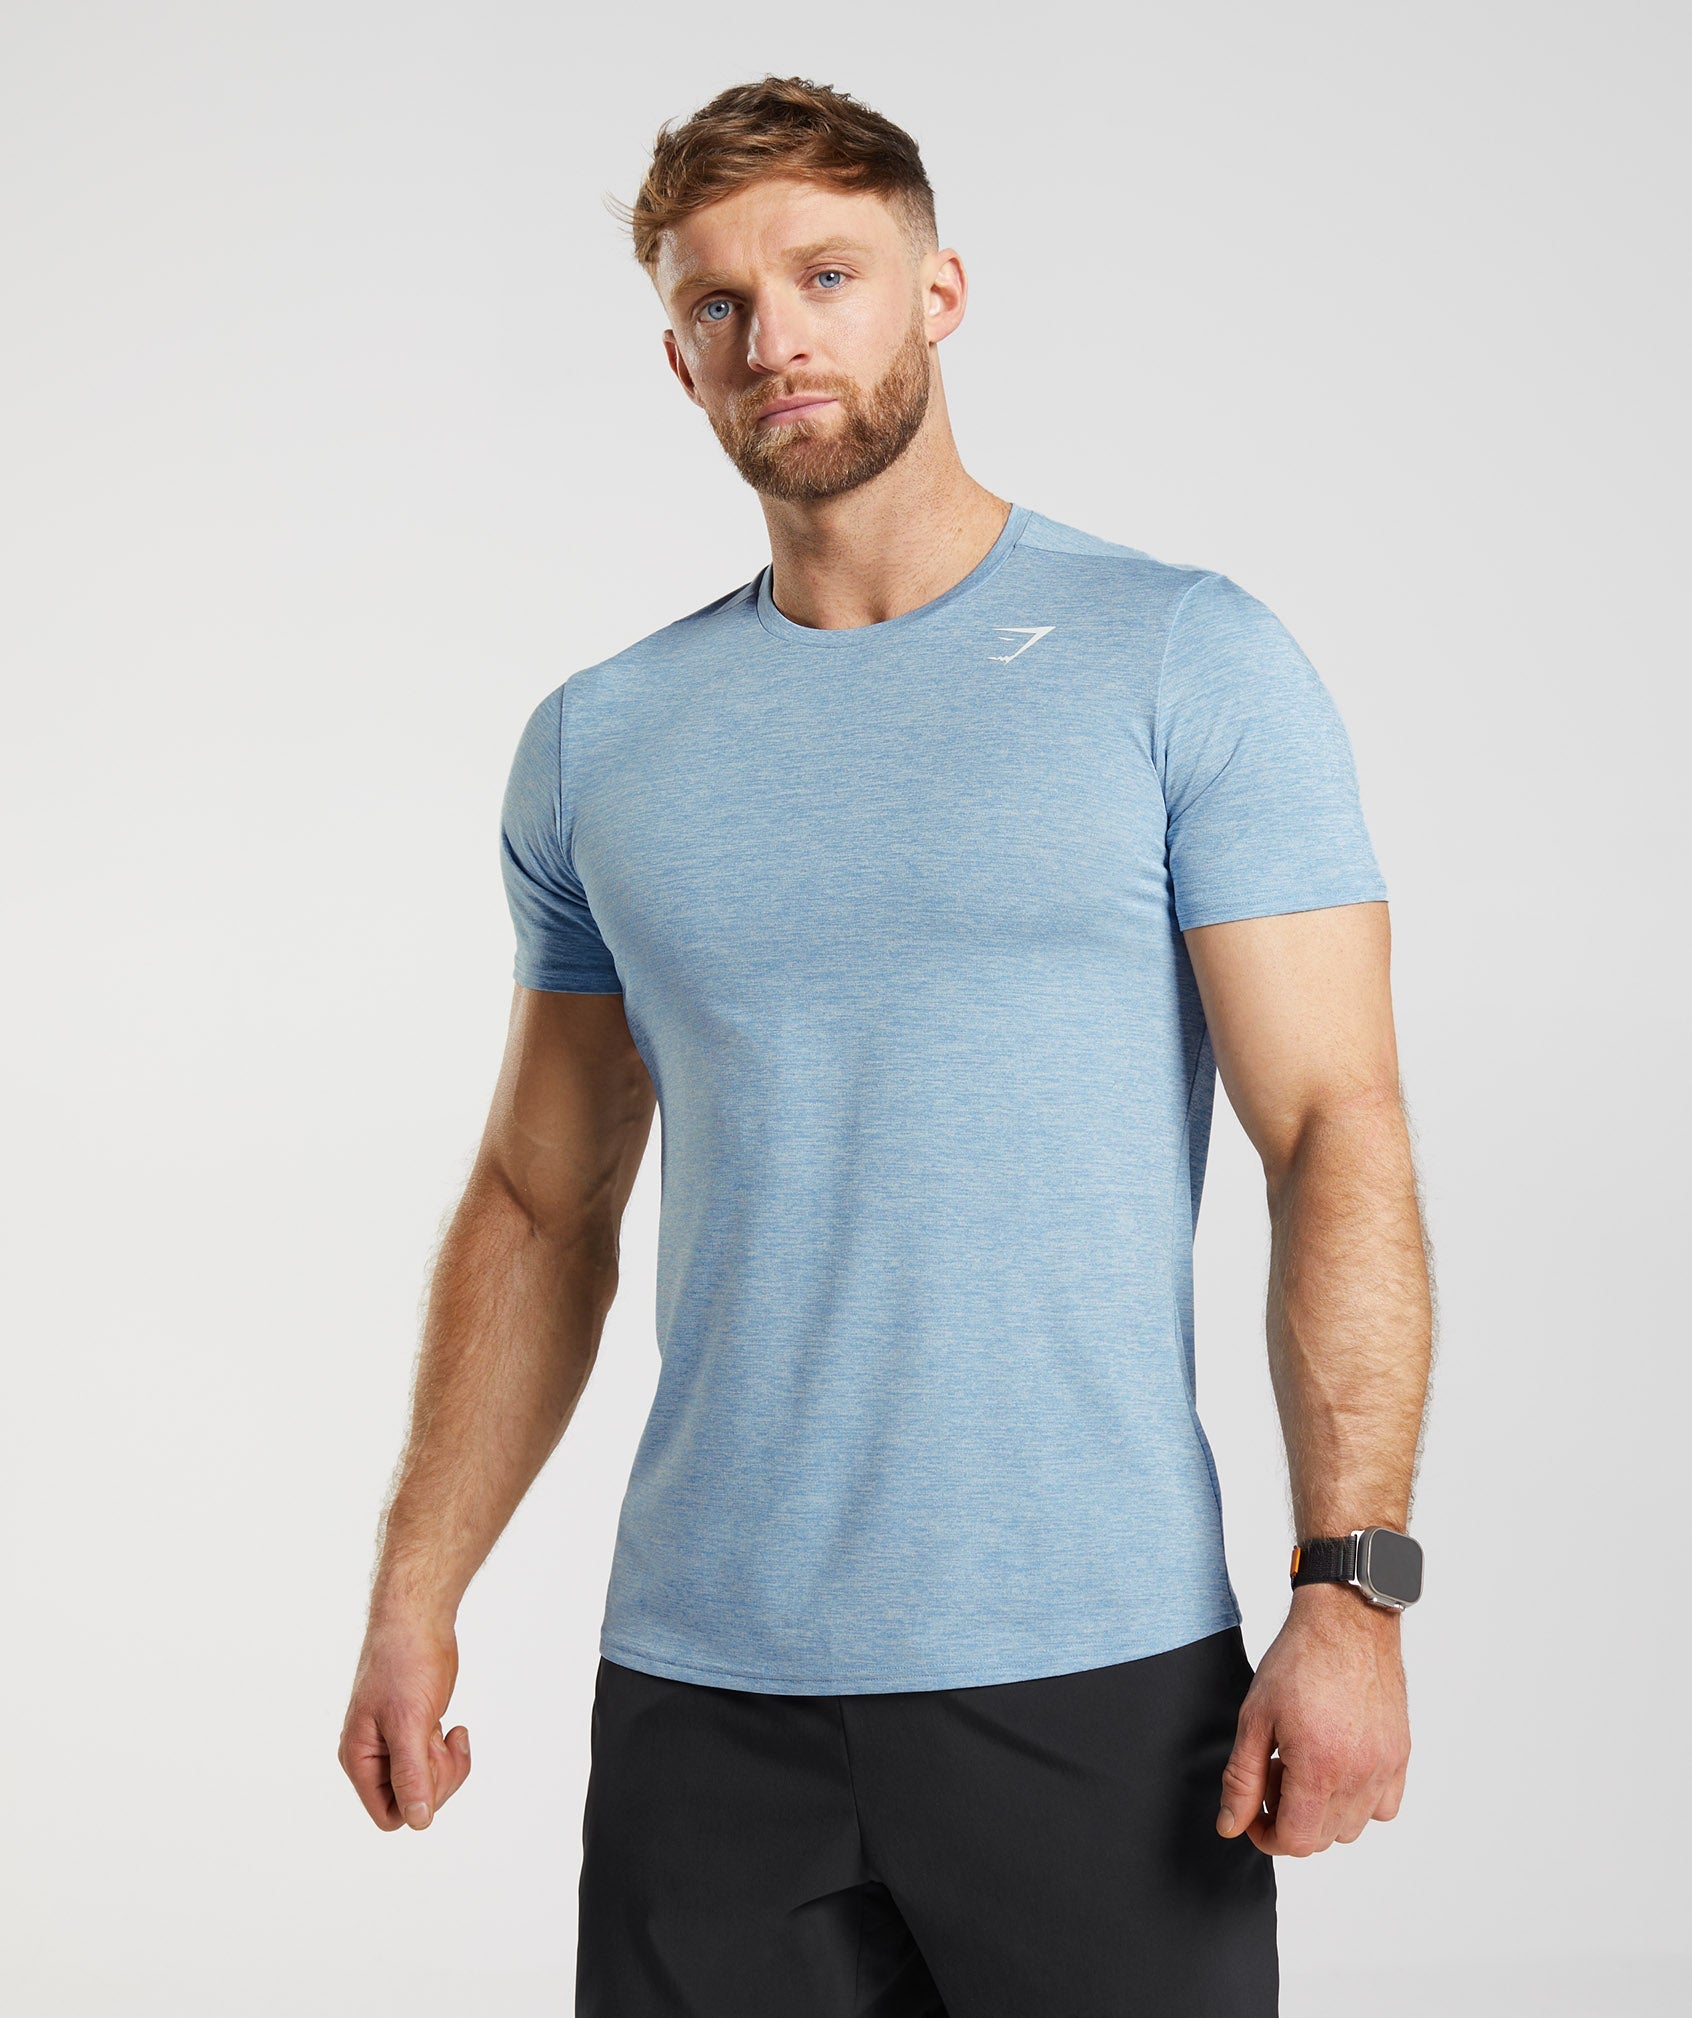 Arrival Marl T-Shirt in Ozone Blue/Skyline Blue Marl - view 1